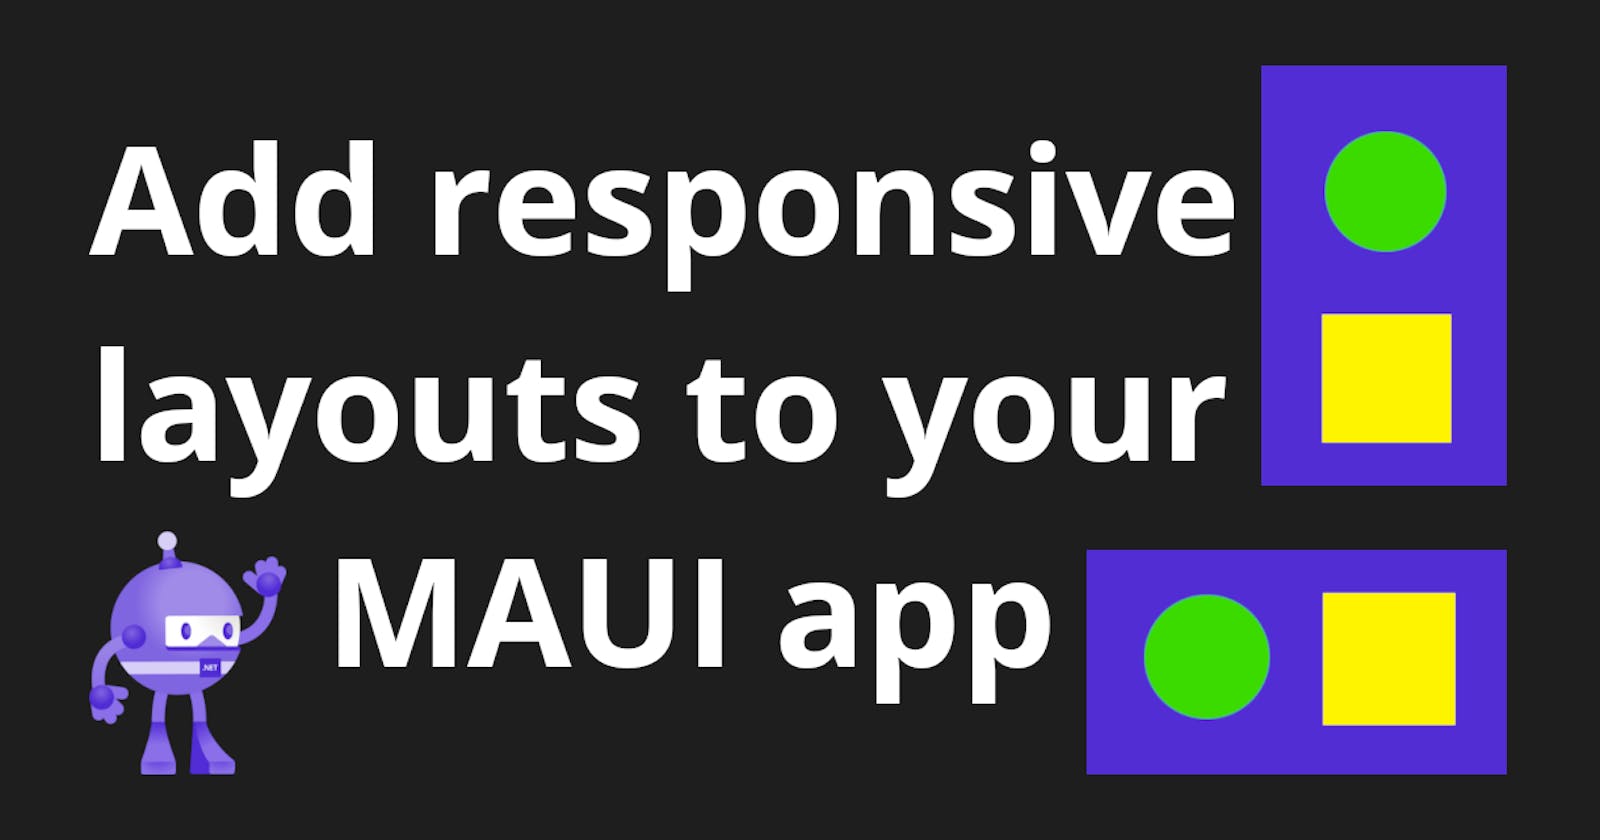 Boost Your App's User Experience with Responsive Layouts for Portrait and Landscape Modes with .NET MAUI